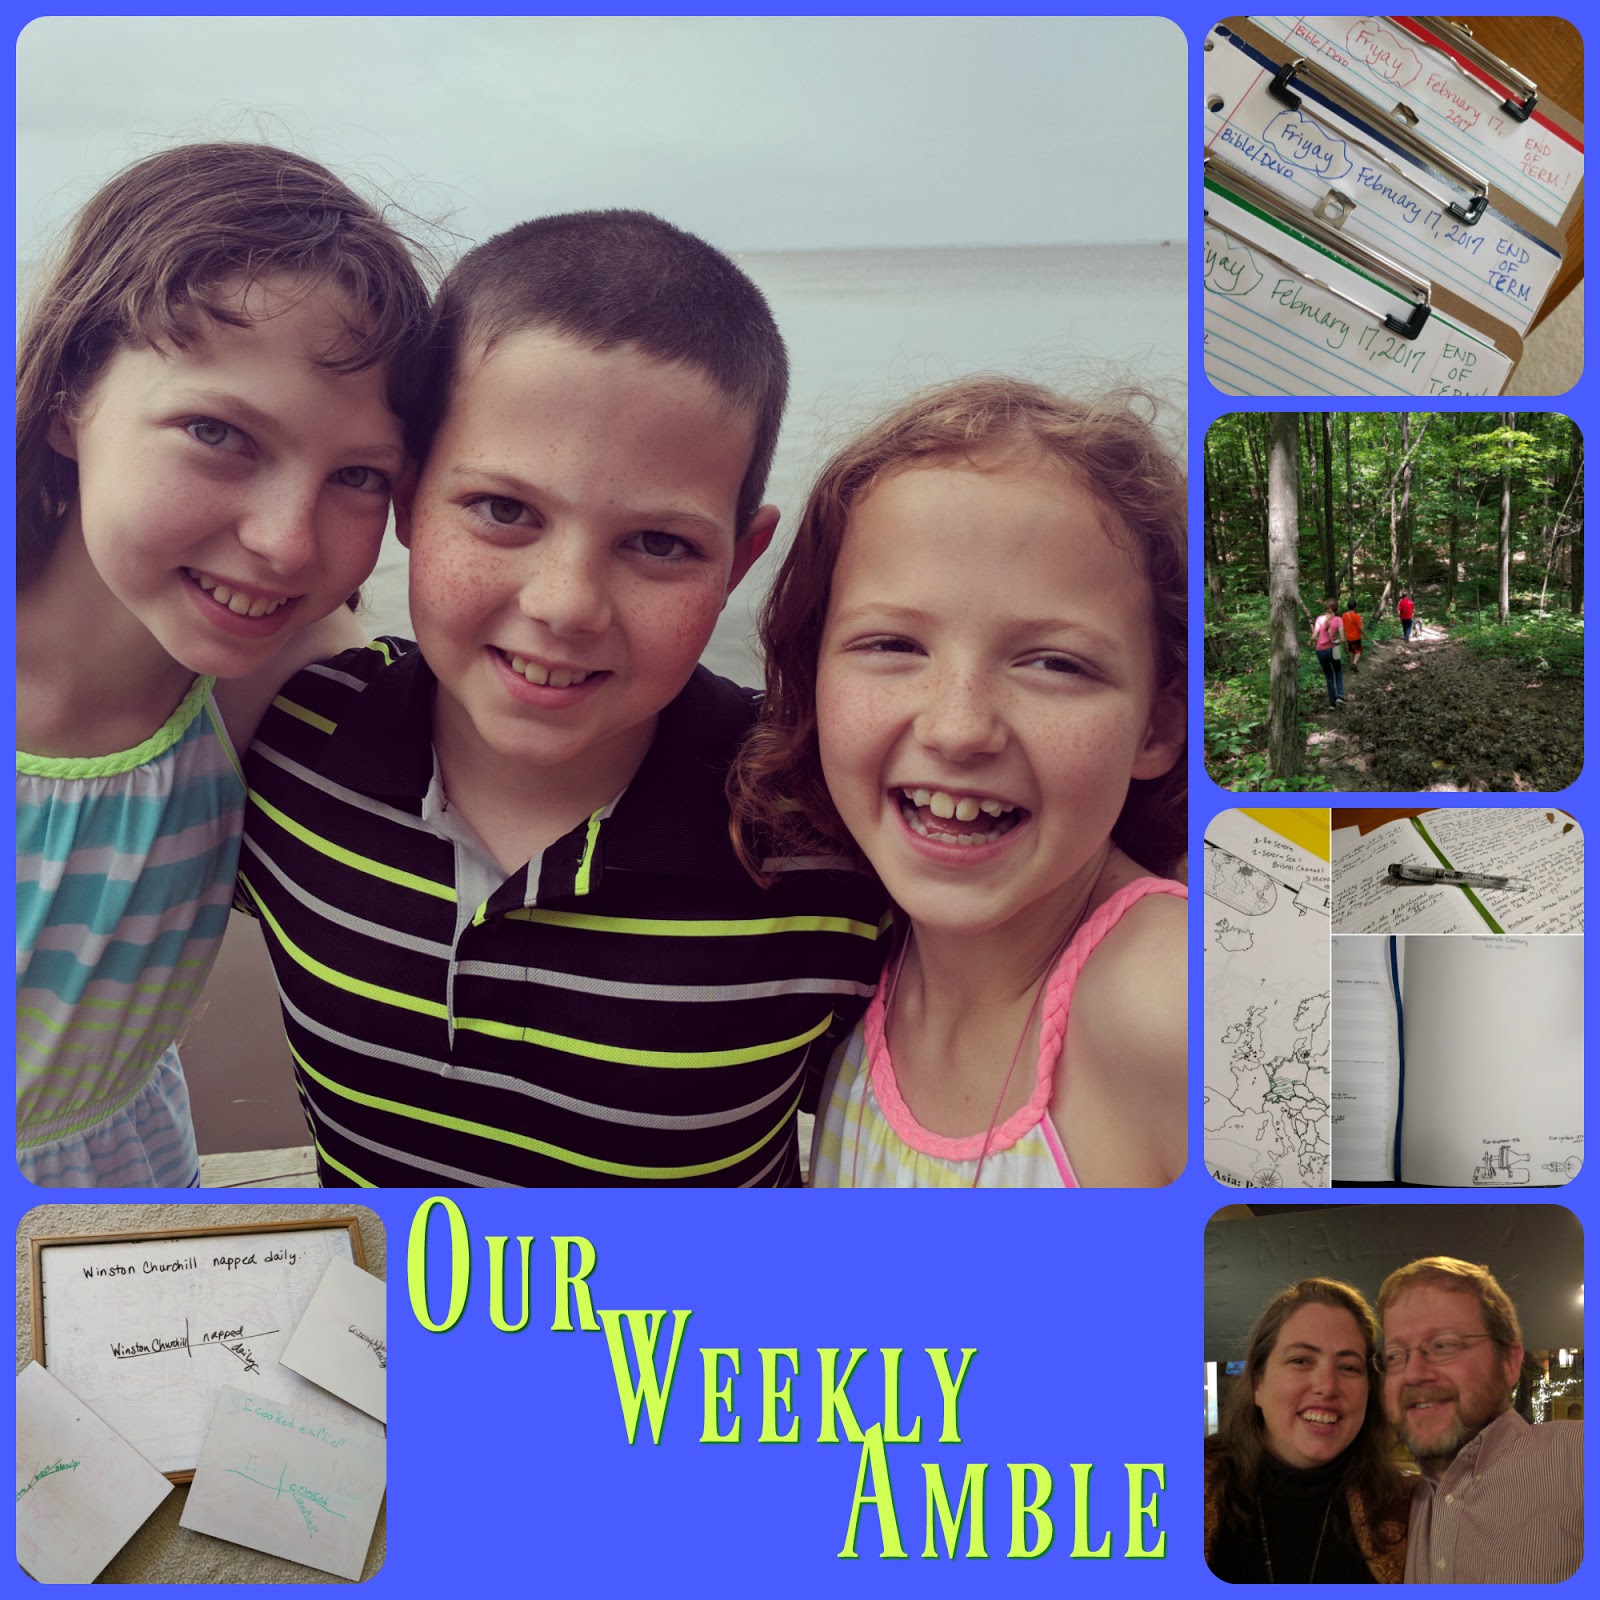 Our Weekly Amble for February 27- March 3, 2017